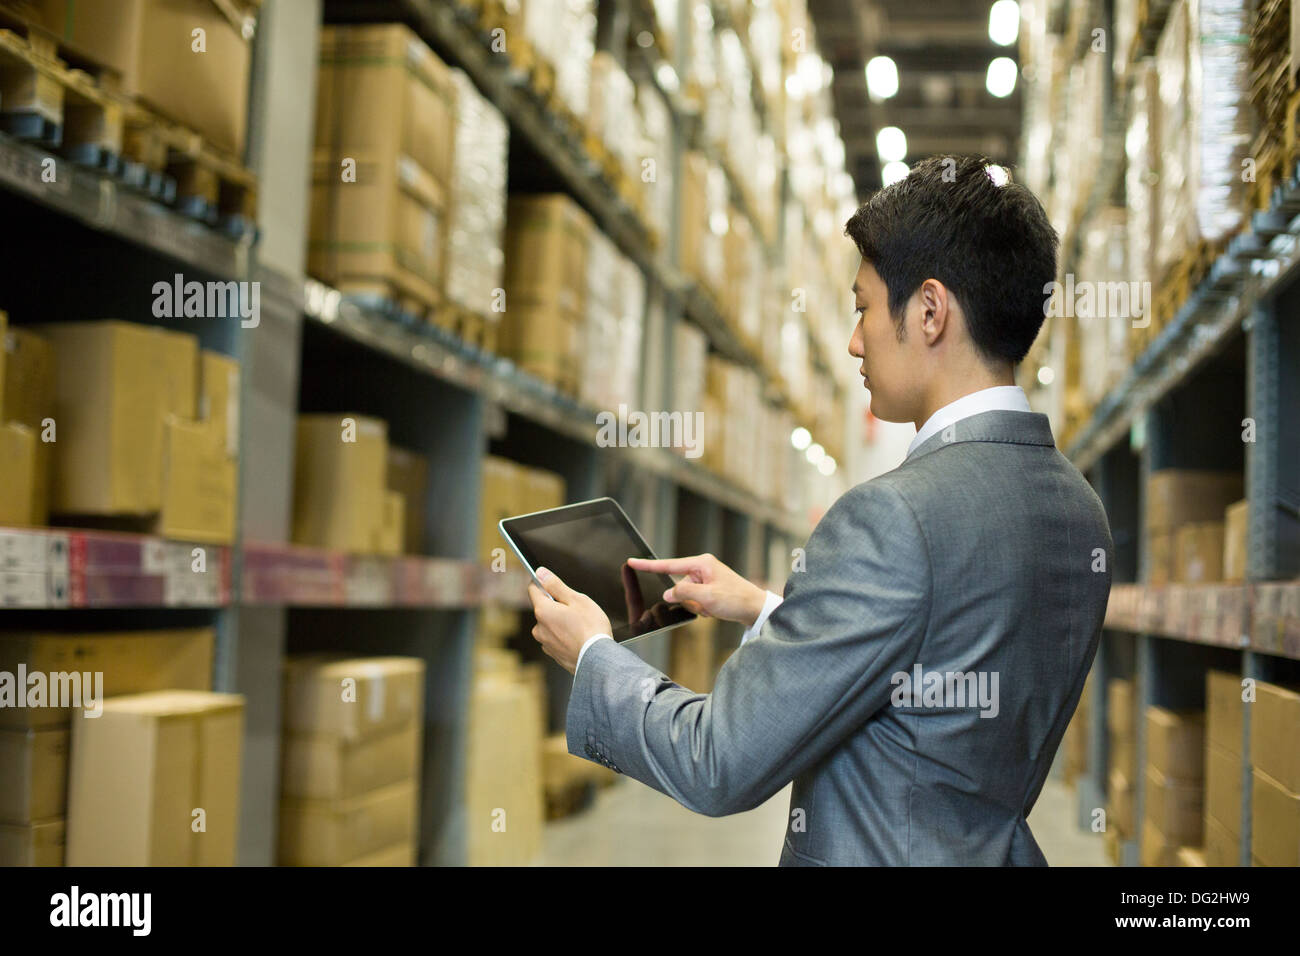 Businessman using digital tablet in warehouse Stock Photo